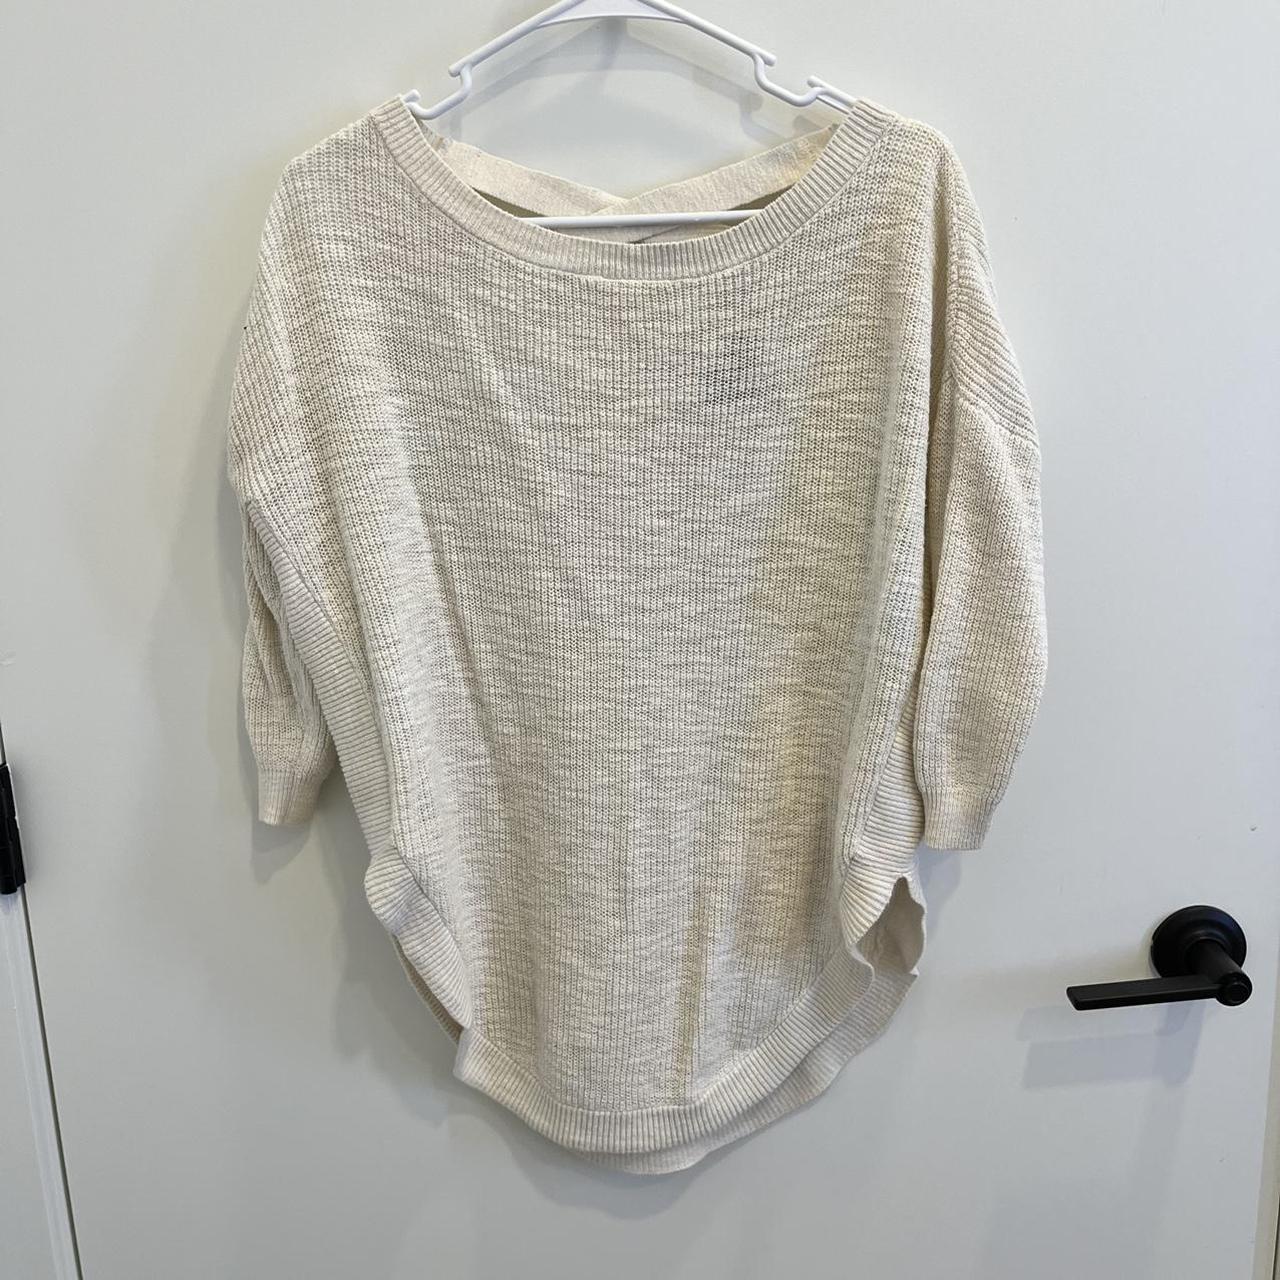 Product Image 3 - Express cream colored sweater with